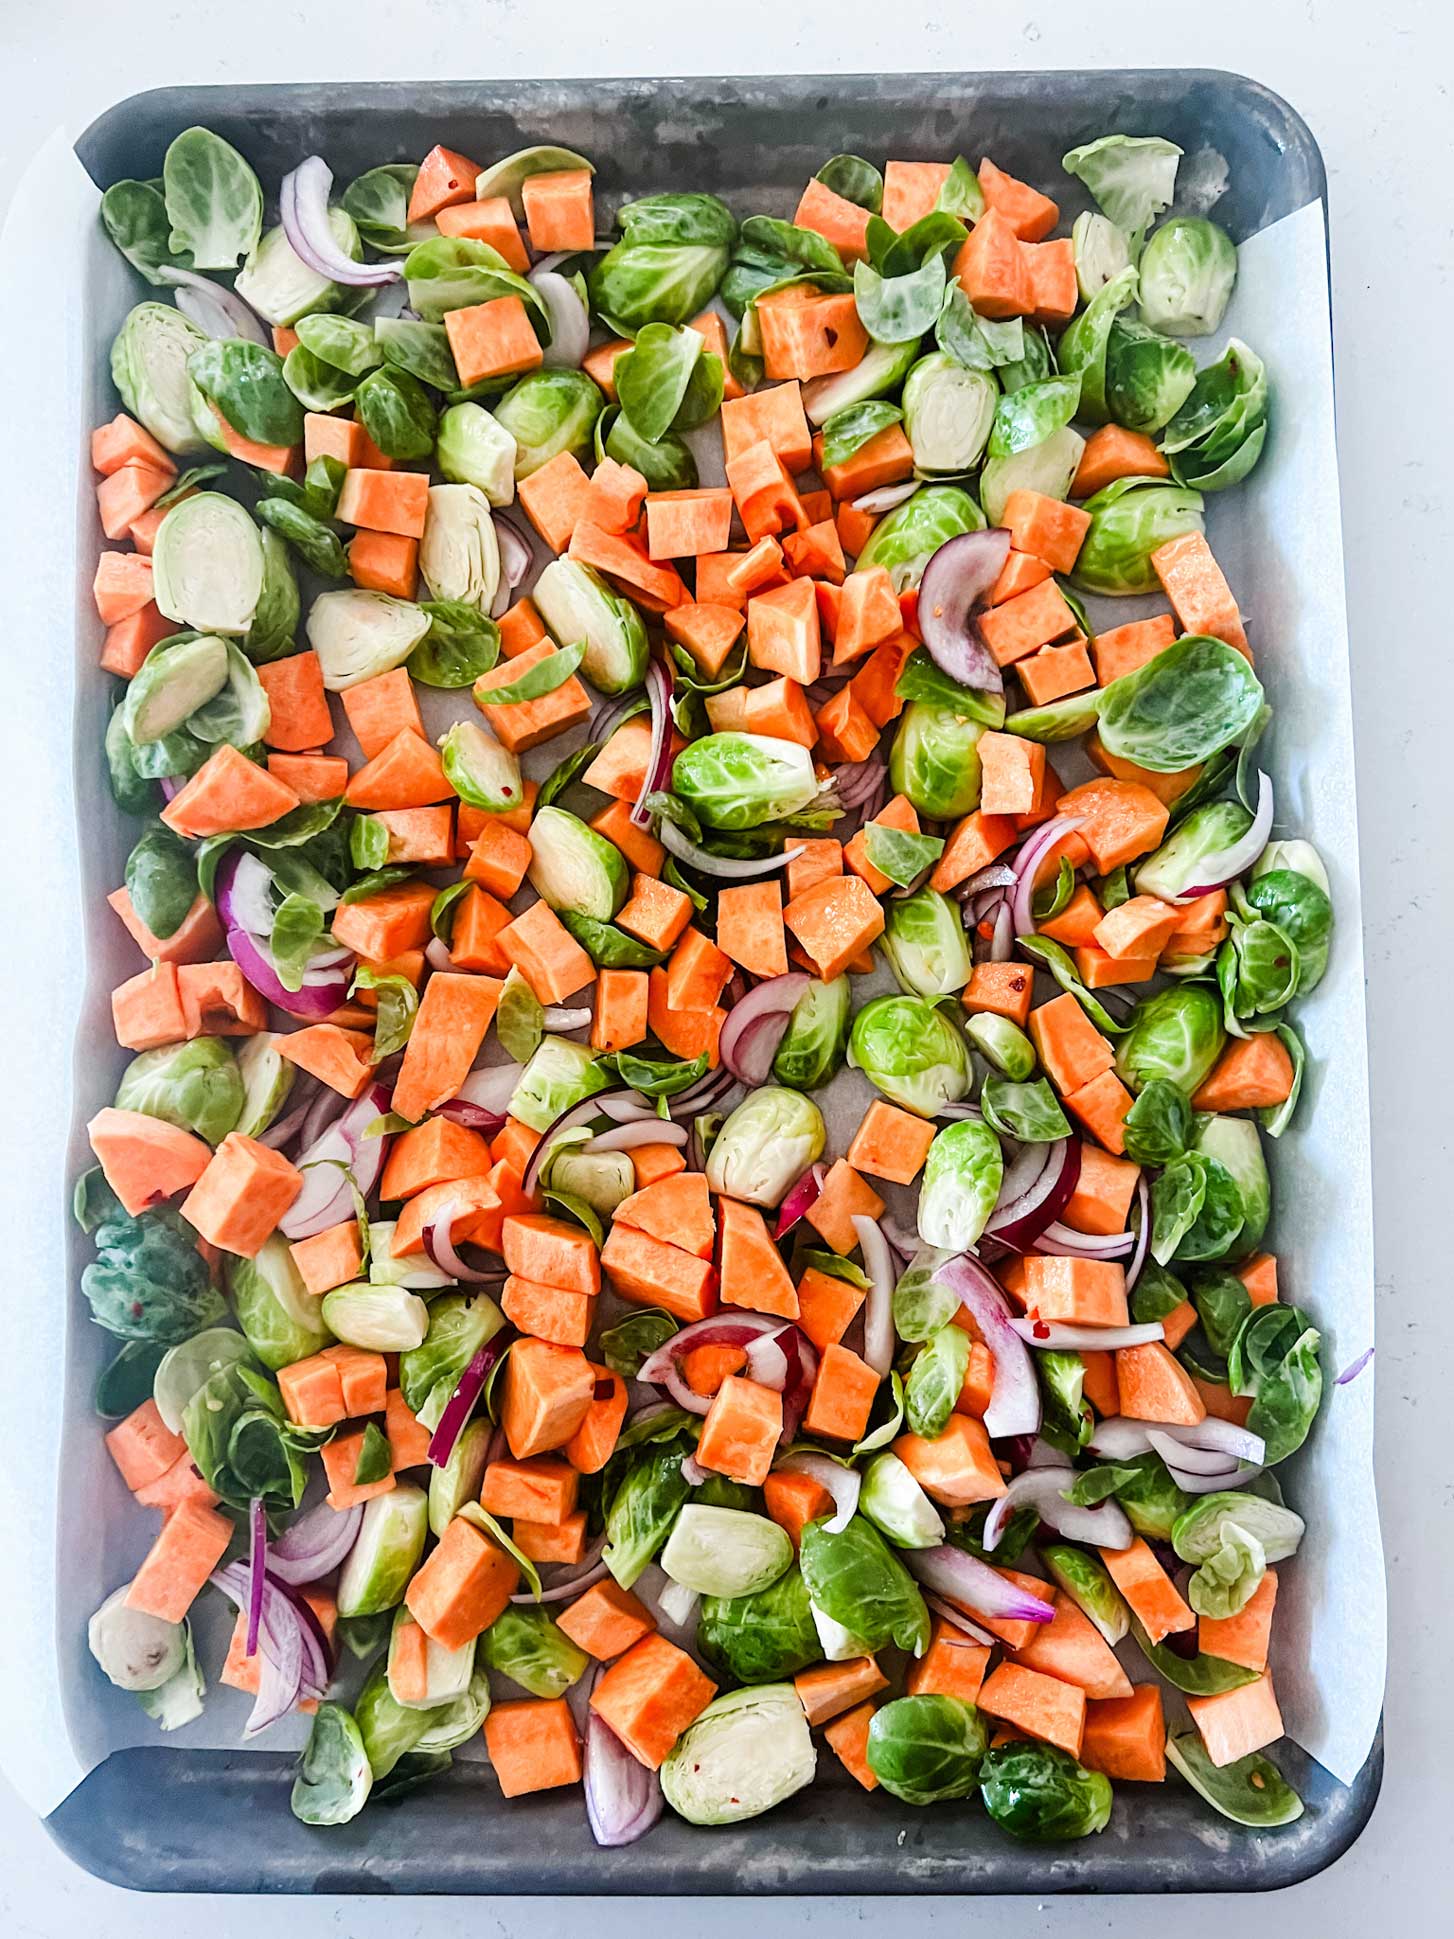 A sheet pan with brussels sprouts, sweet potatoes, and red onion ready for the oven.